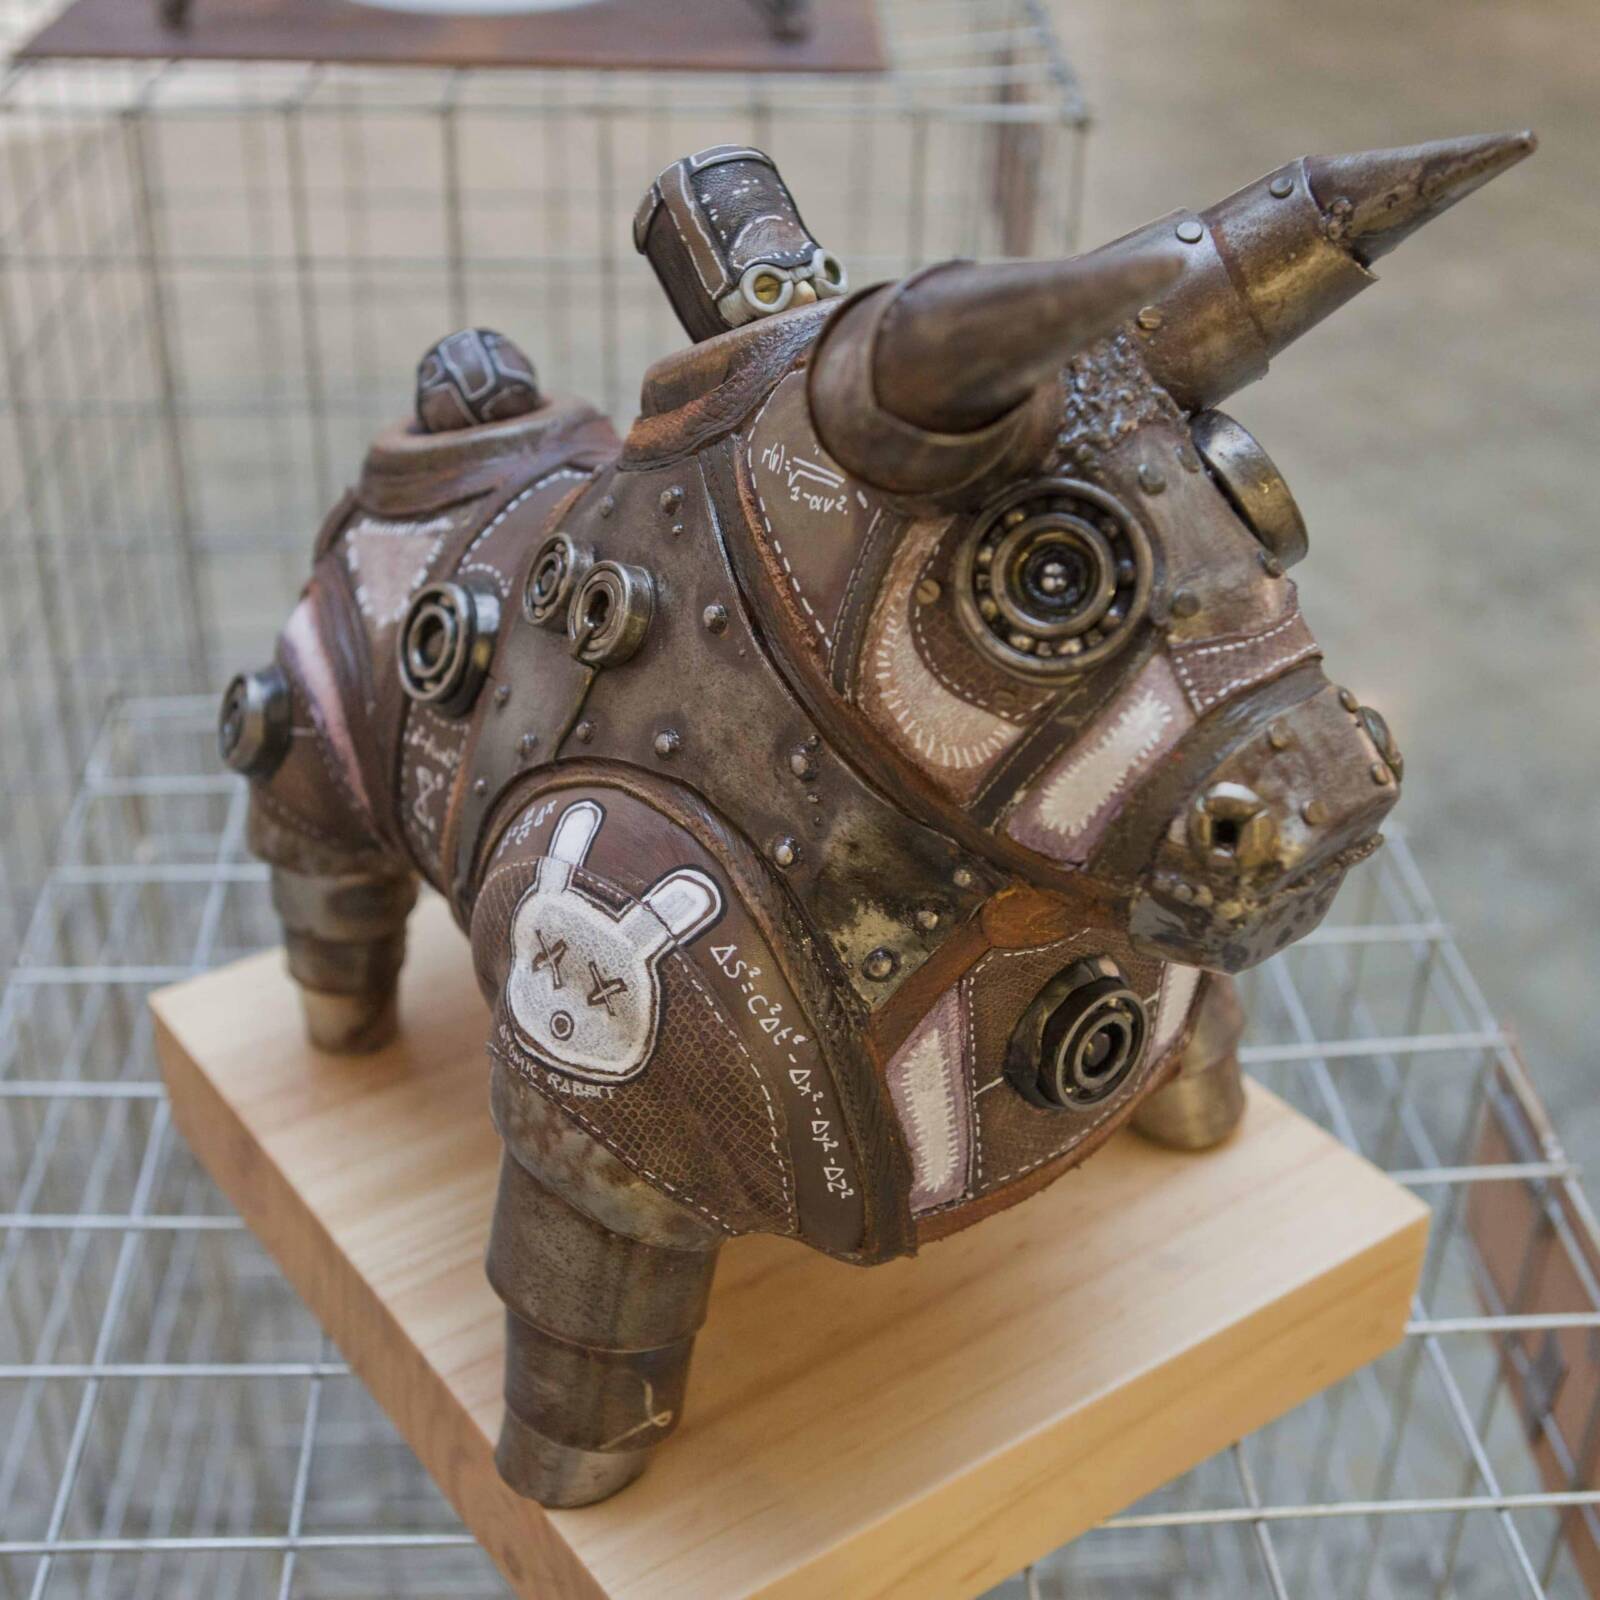 Cool interview with Experimenta Magazine: Art toy and dieselpunk art